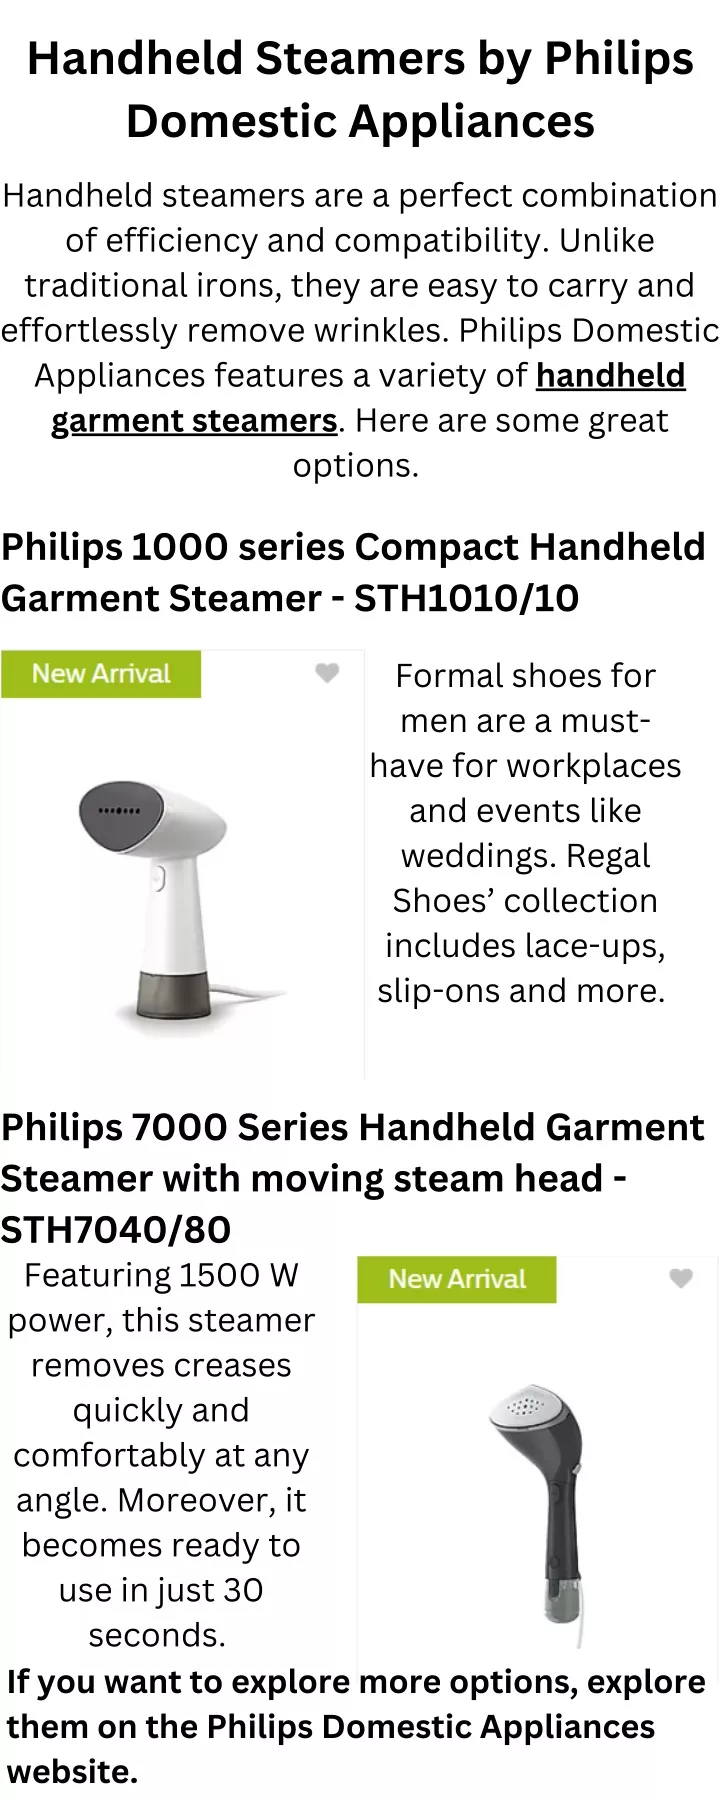 handheld steamers by philips domestic appliances